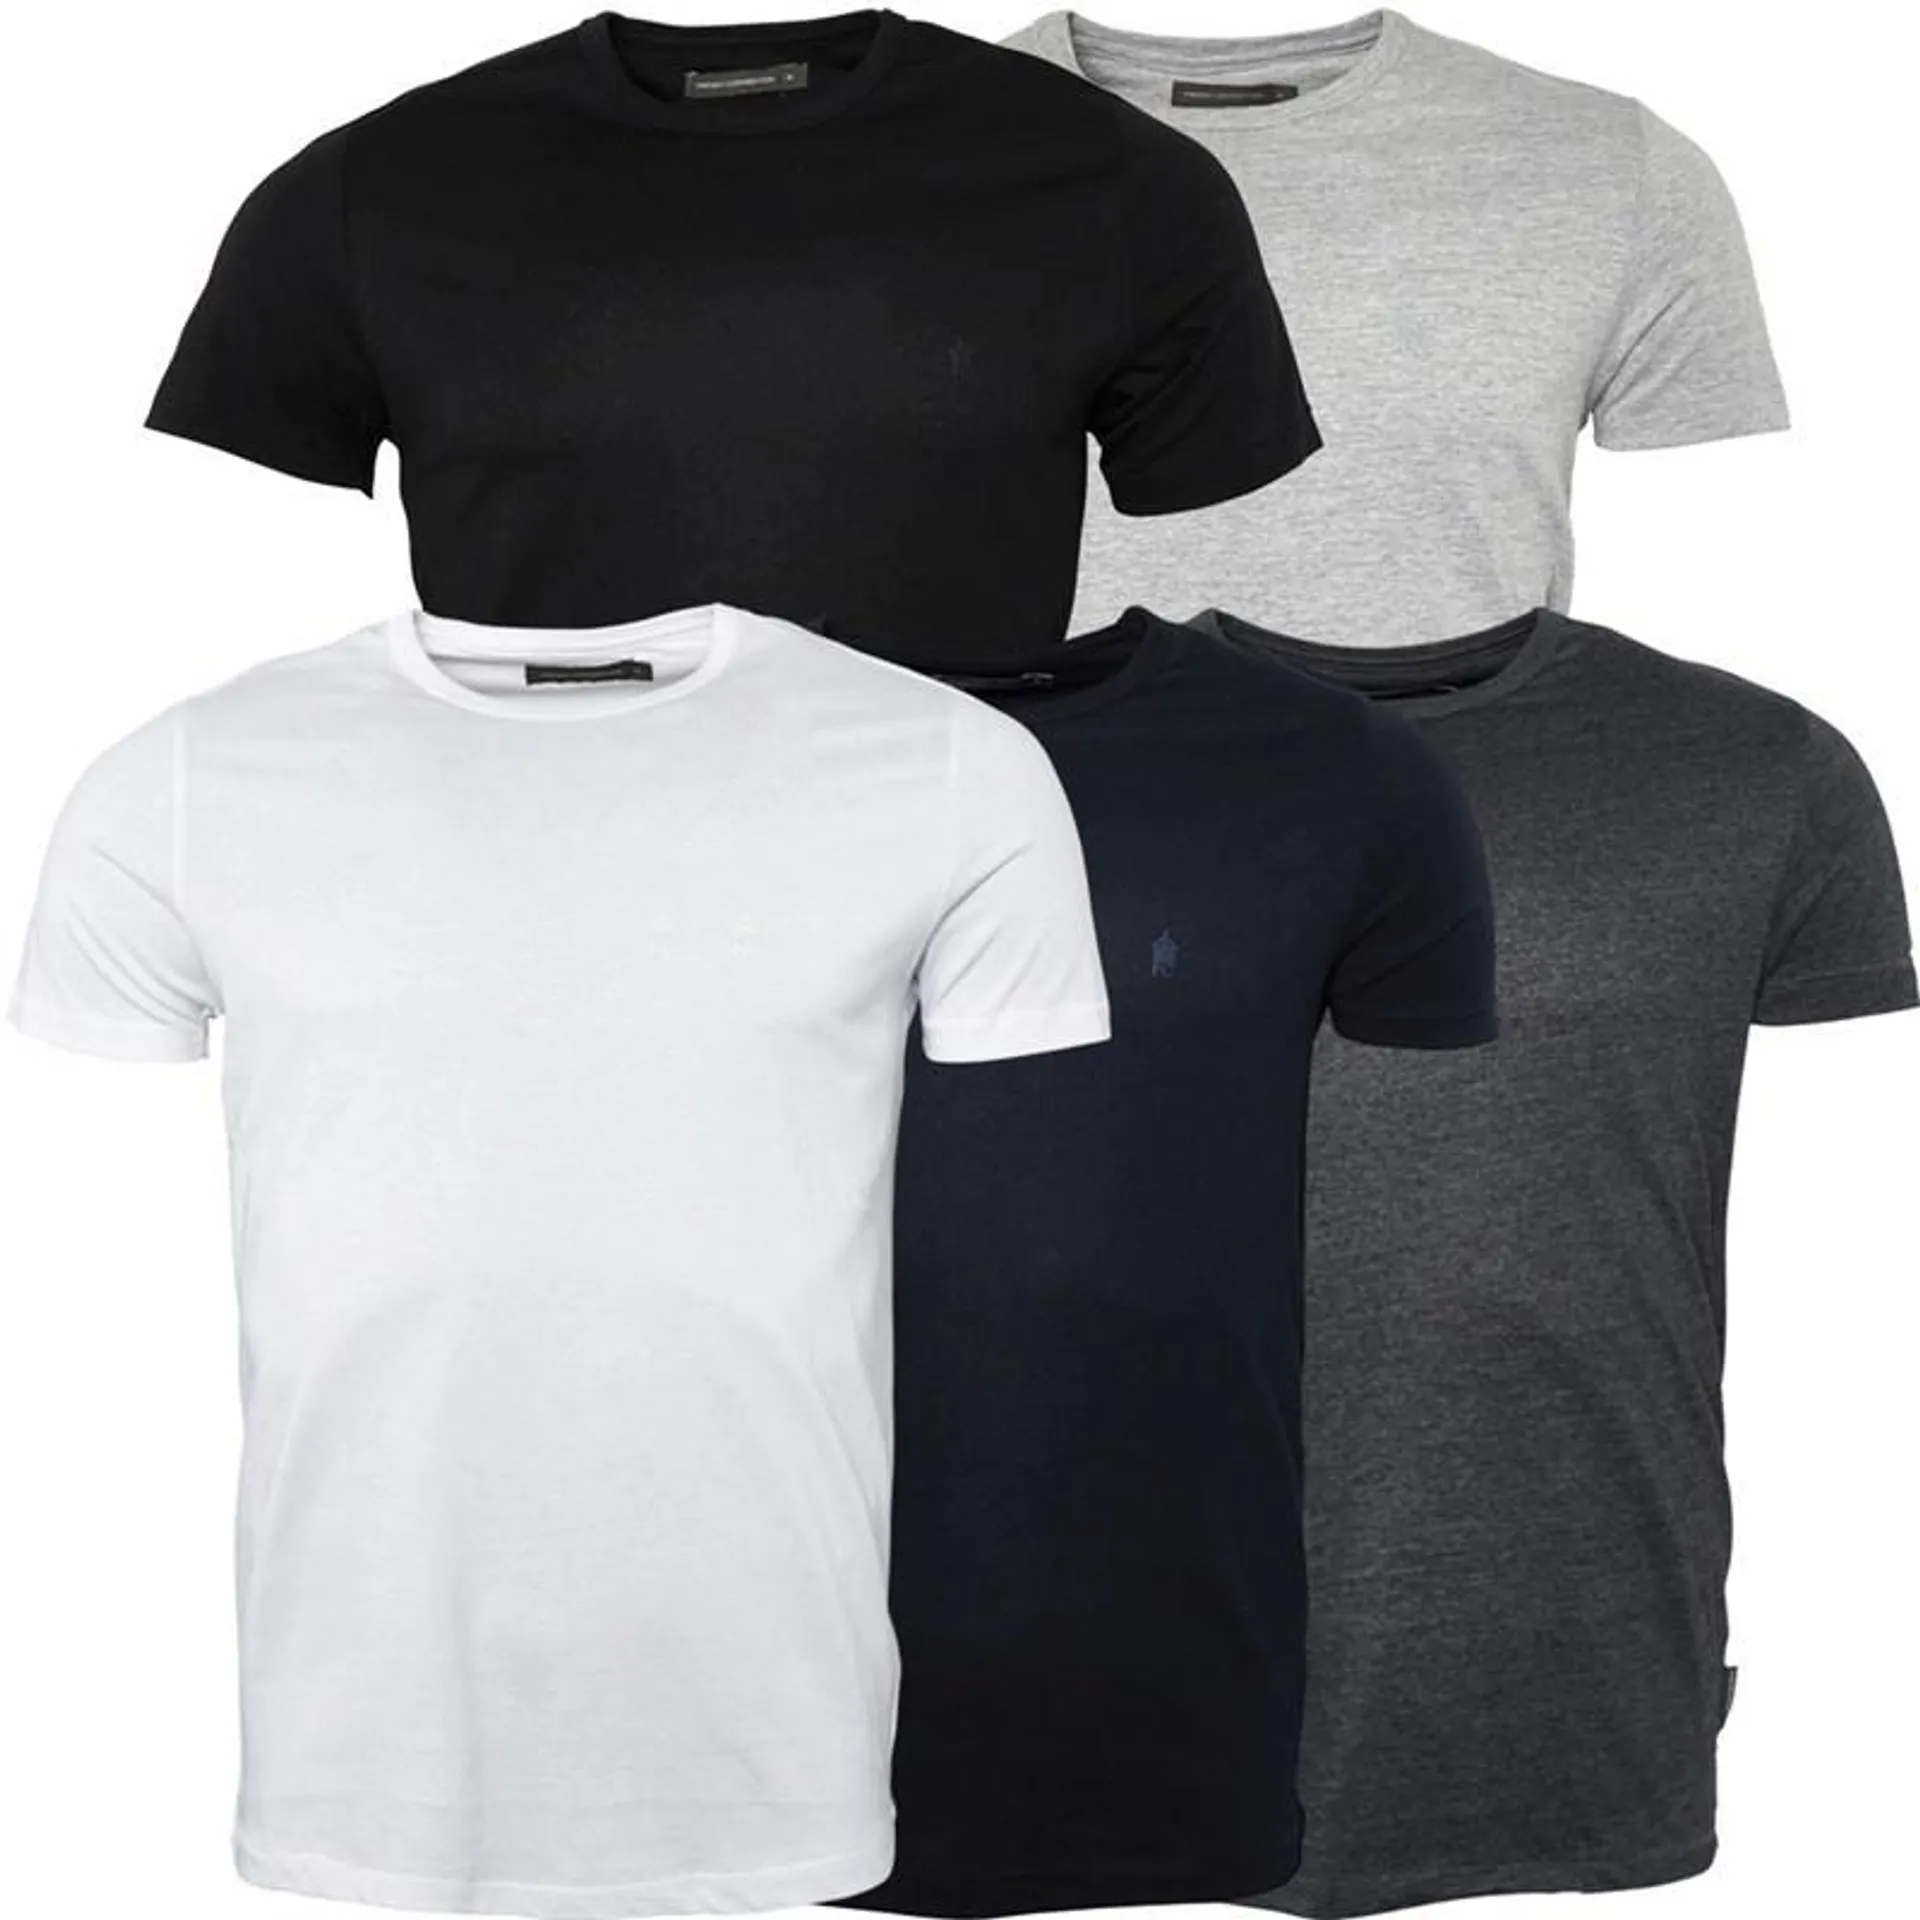 French Connection Mens Five Pack Crew T-Shirts Multi 1 - Black/White/Marine/Light Grey Melange/Charcoal